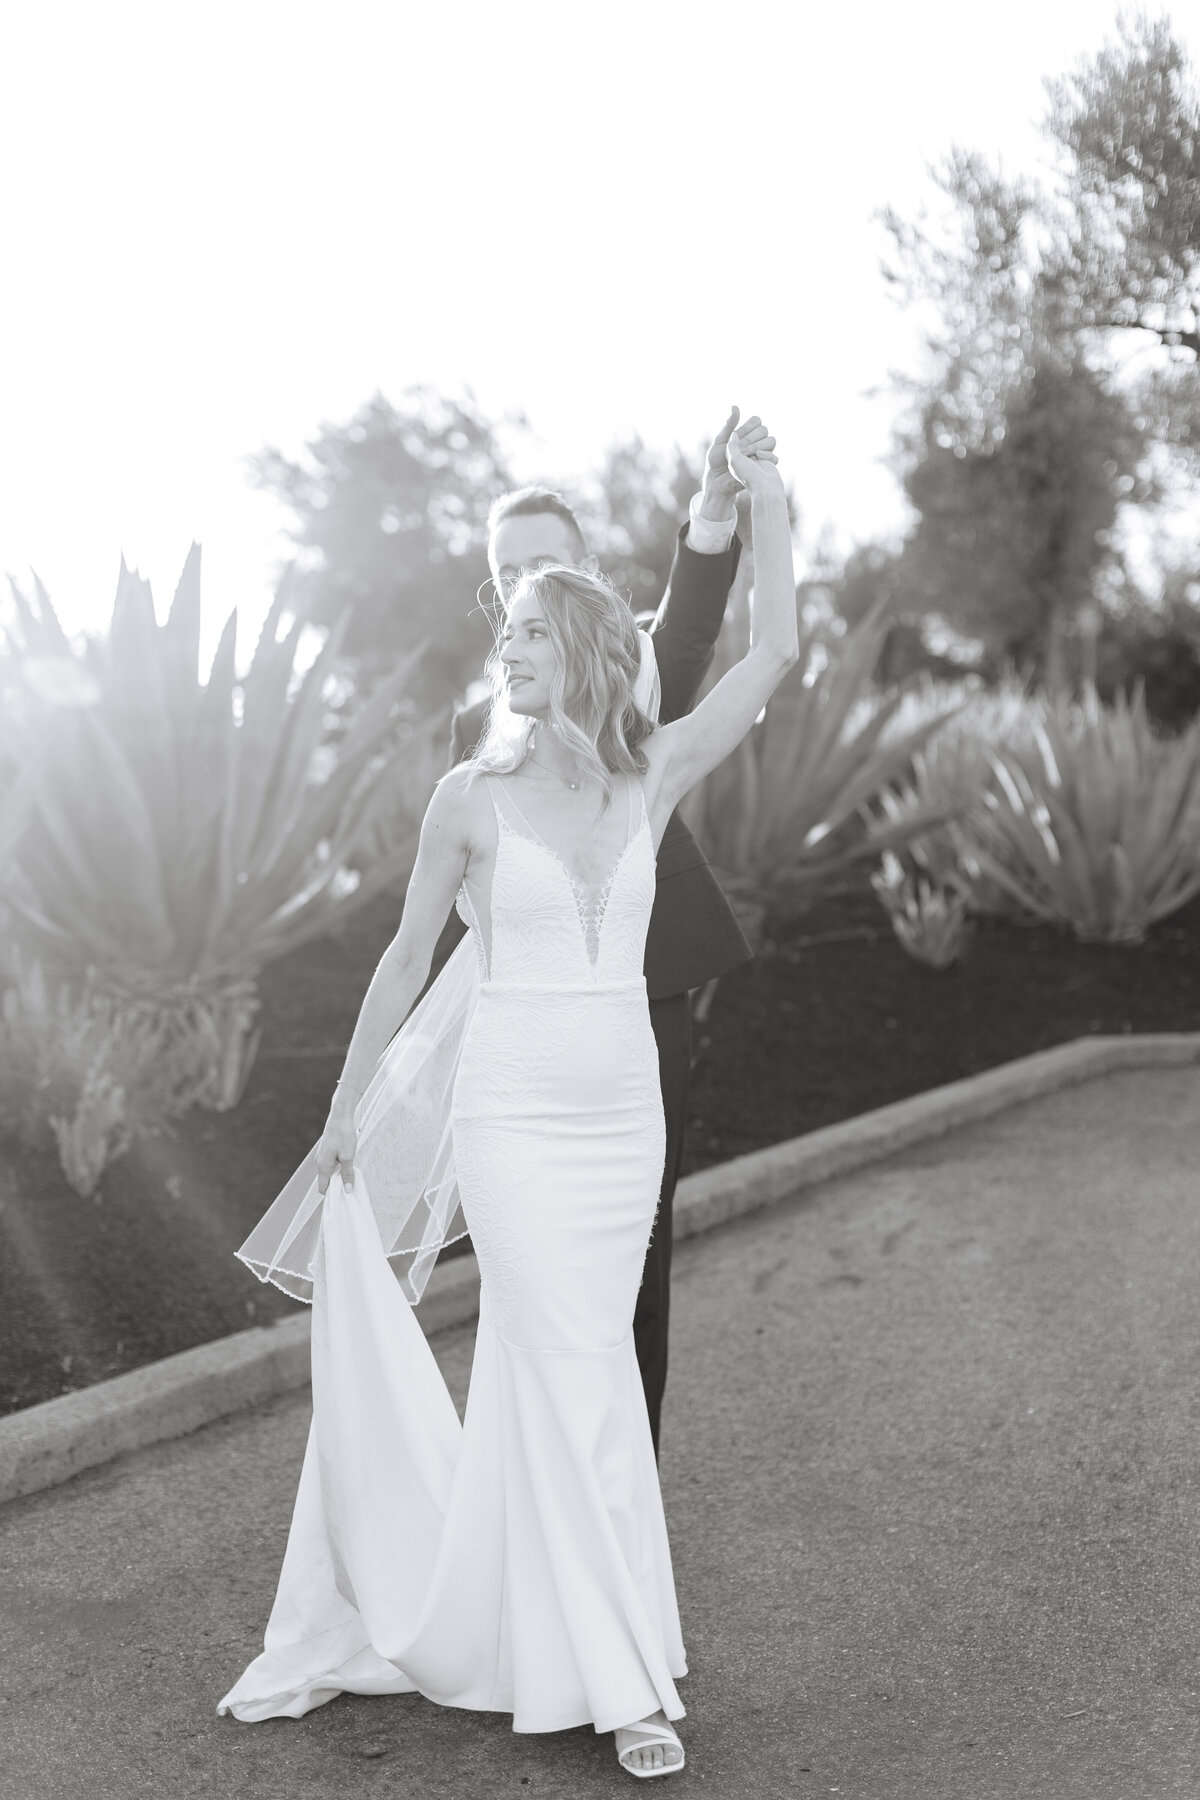 black and white image of bride and groom dancing in front of agave plants at golden hour.